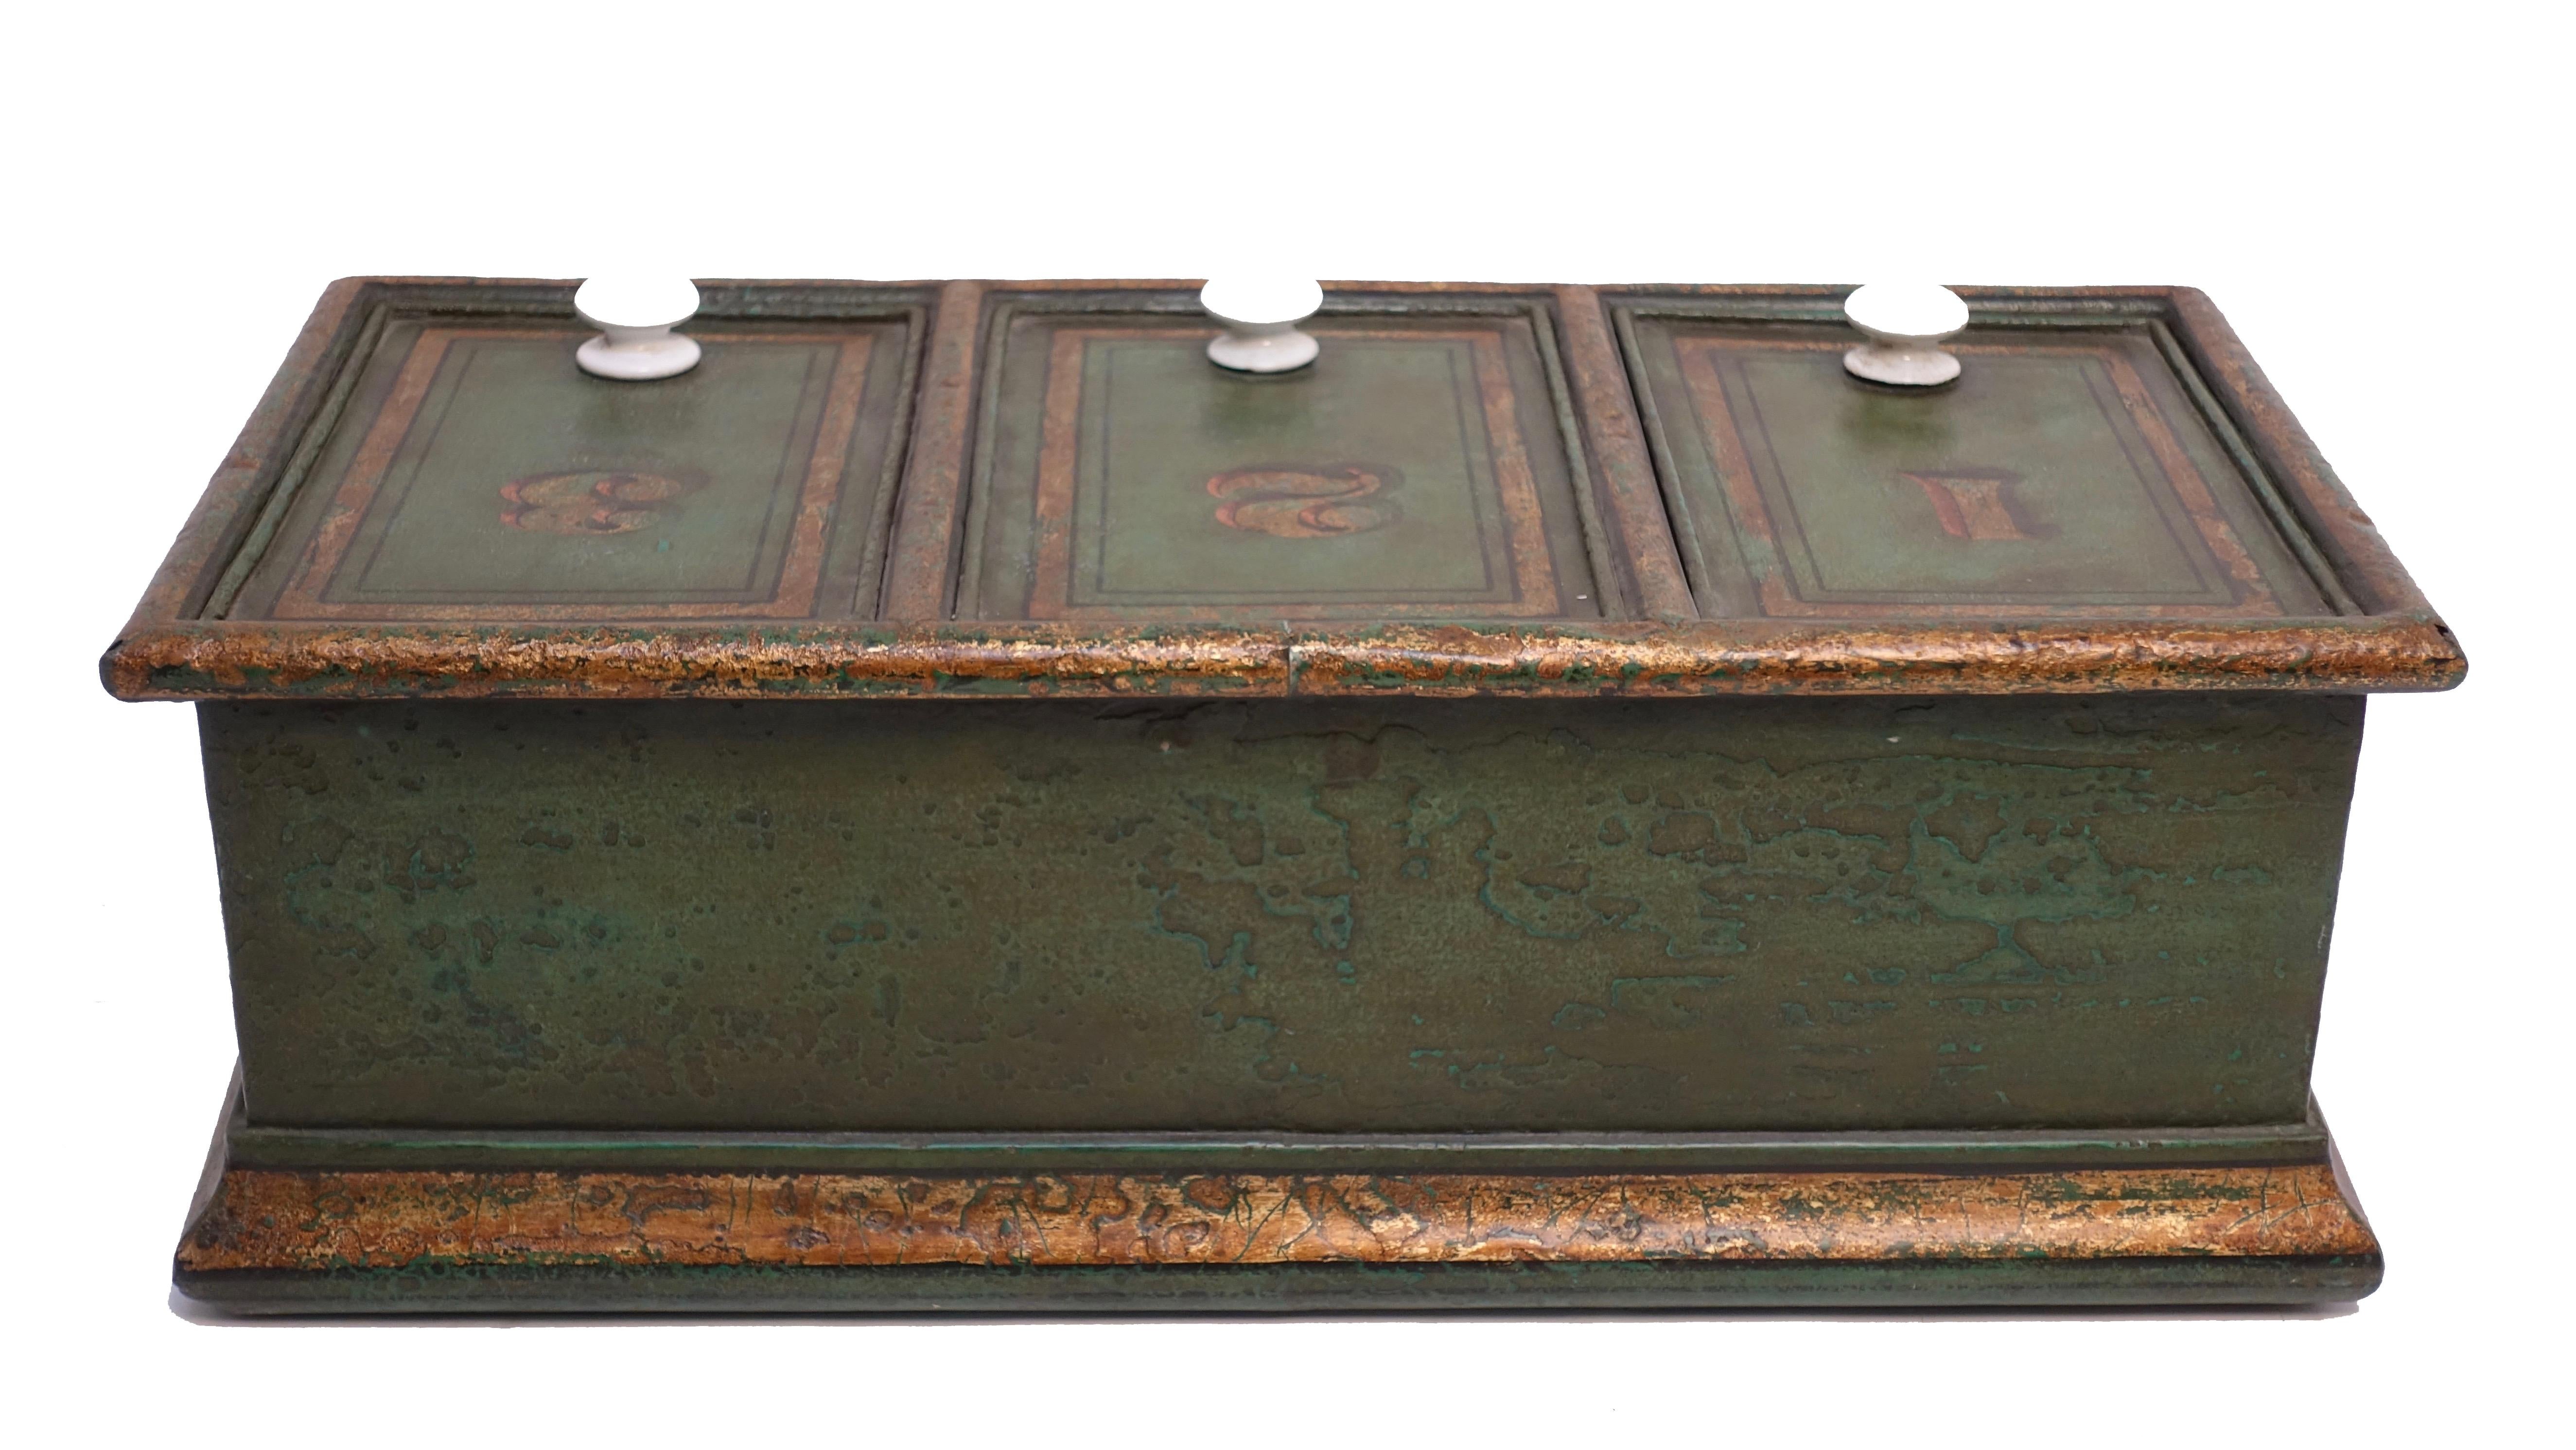 Green Tole Painted Coffee Bin Store Display Dispenser, England, 19th Century 1